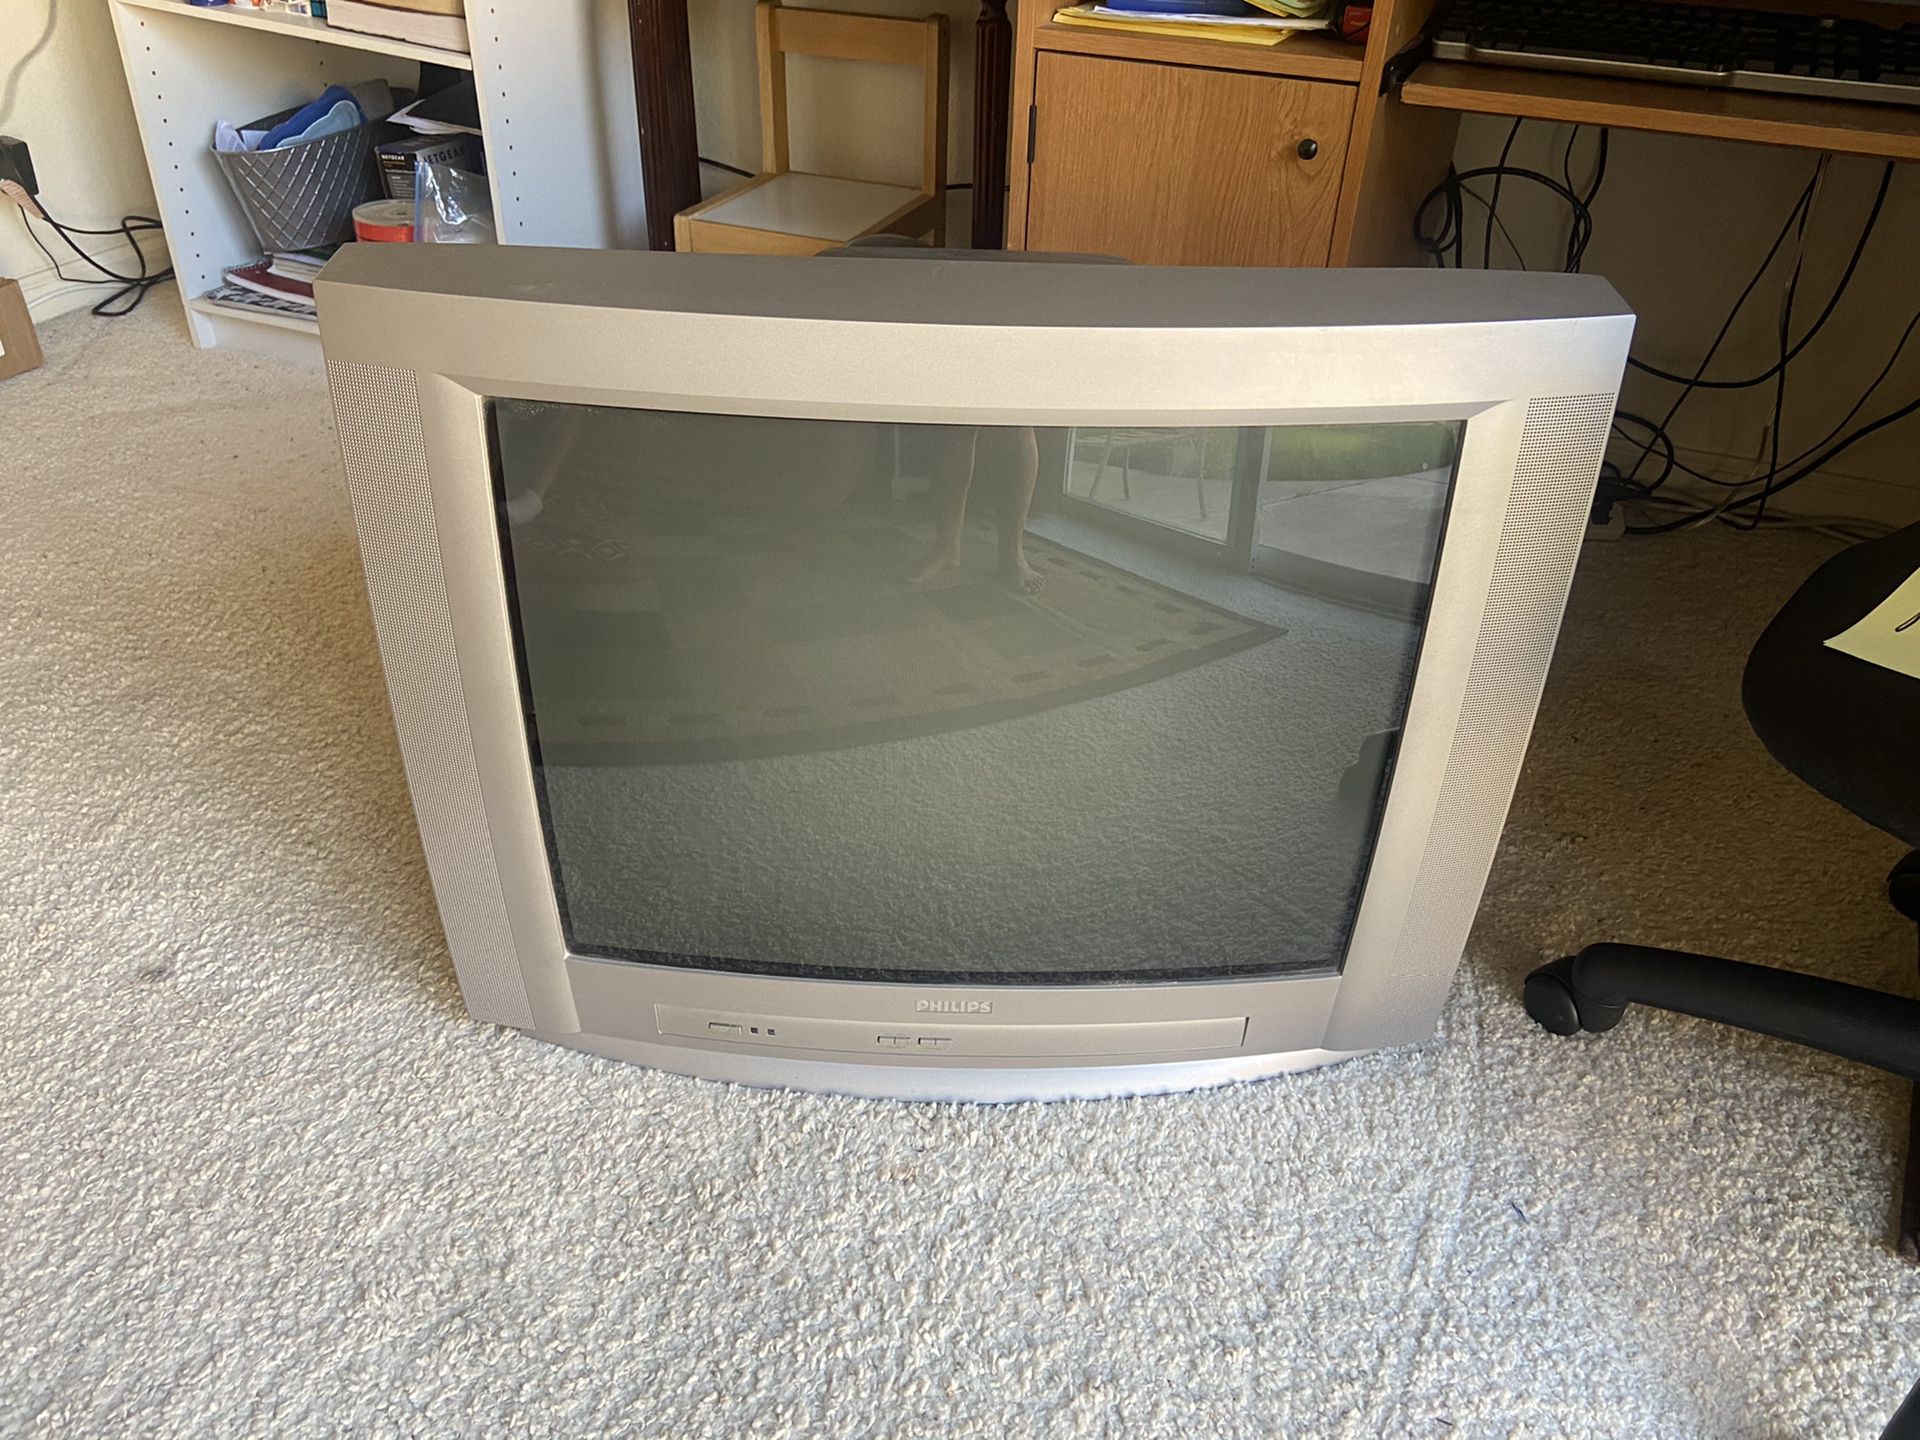 TV for free